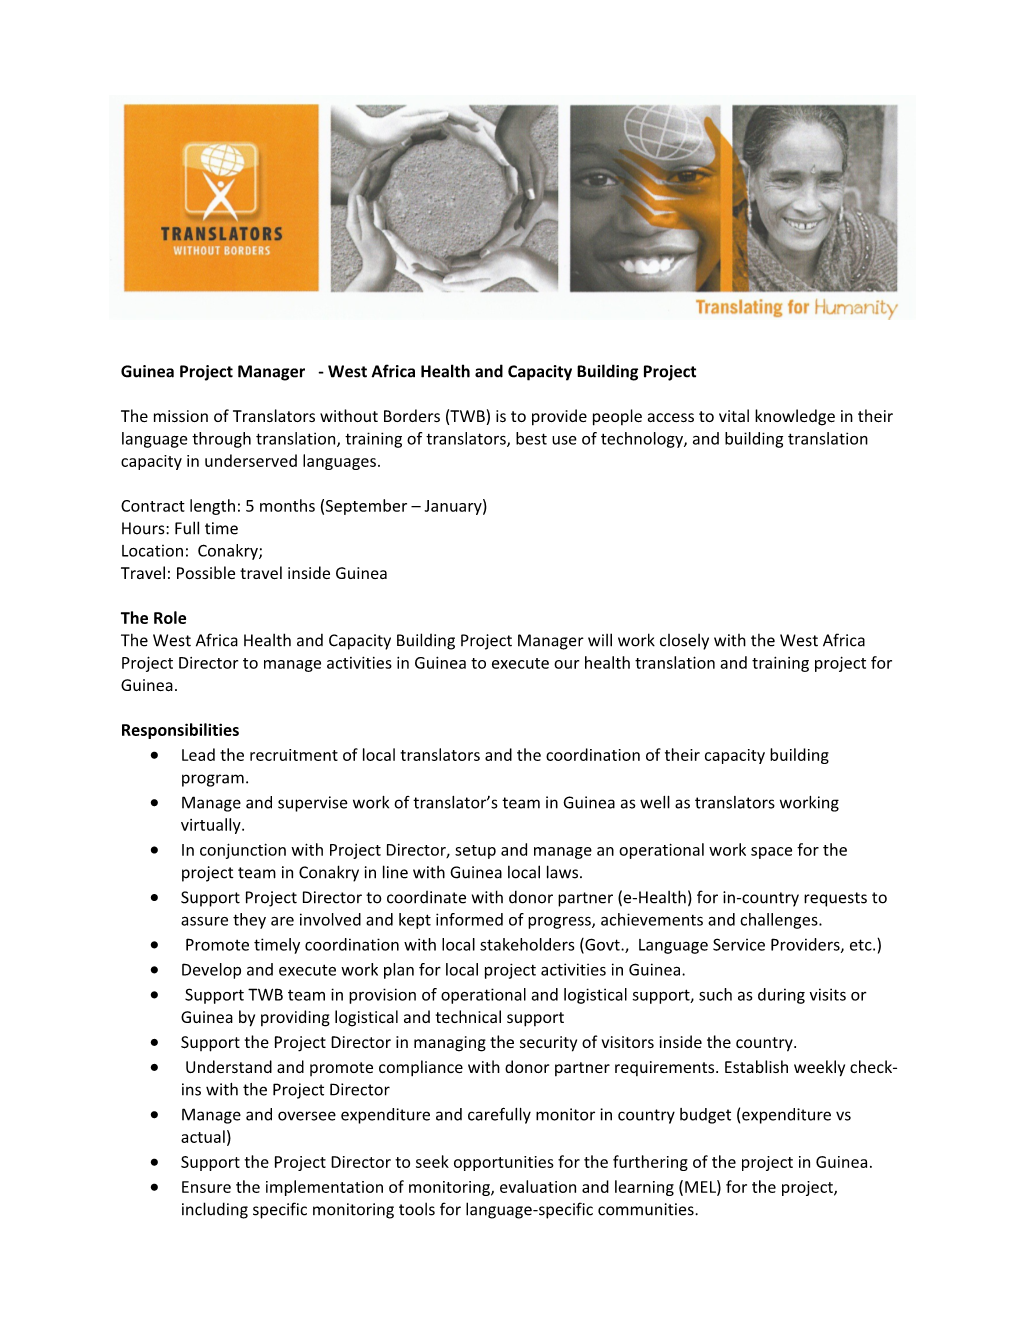 Guinea Project Manager - West Africa Health and Capacity Building Project